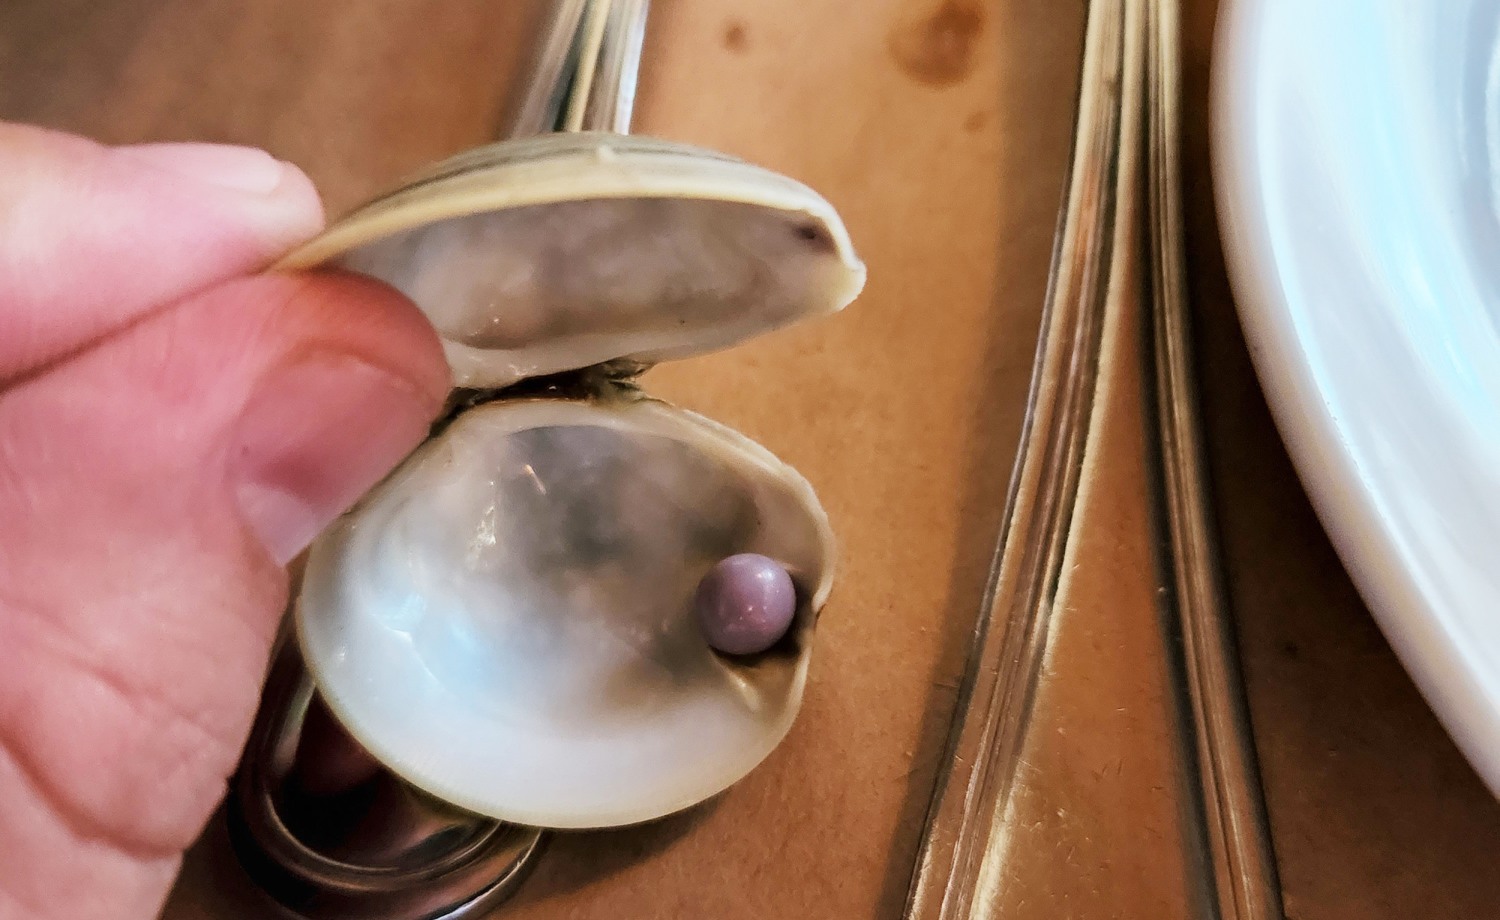 Man Discovers Rare Pearl in Clam Appetizer at Delaware Restaurant